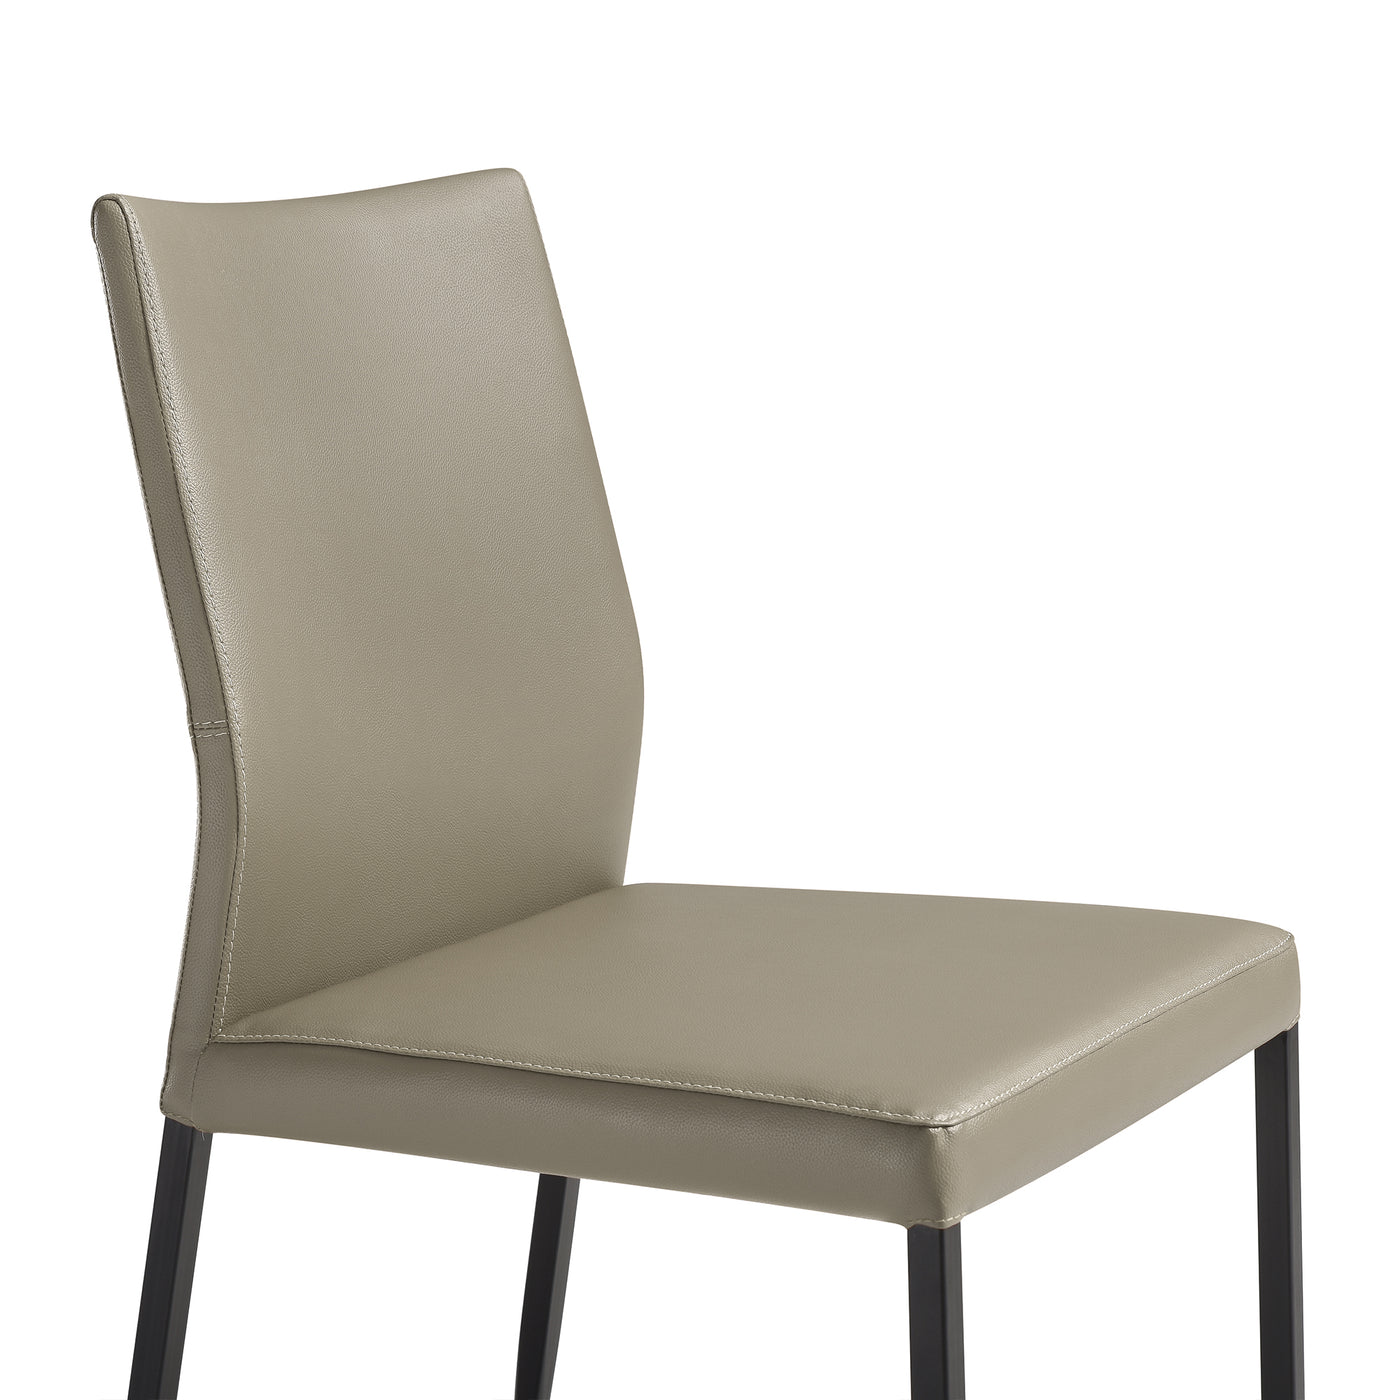 Kash Upholstered Dining Chair Set of 2